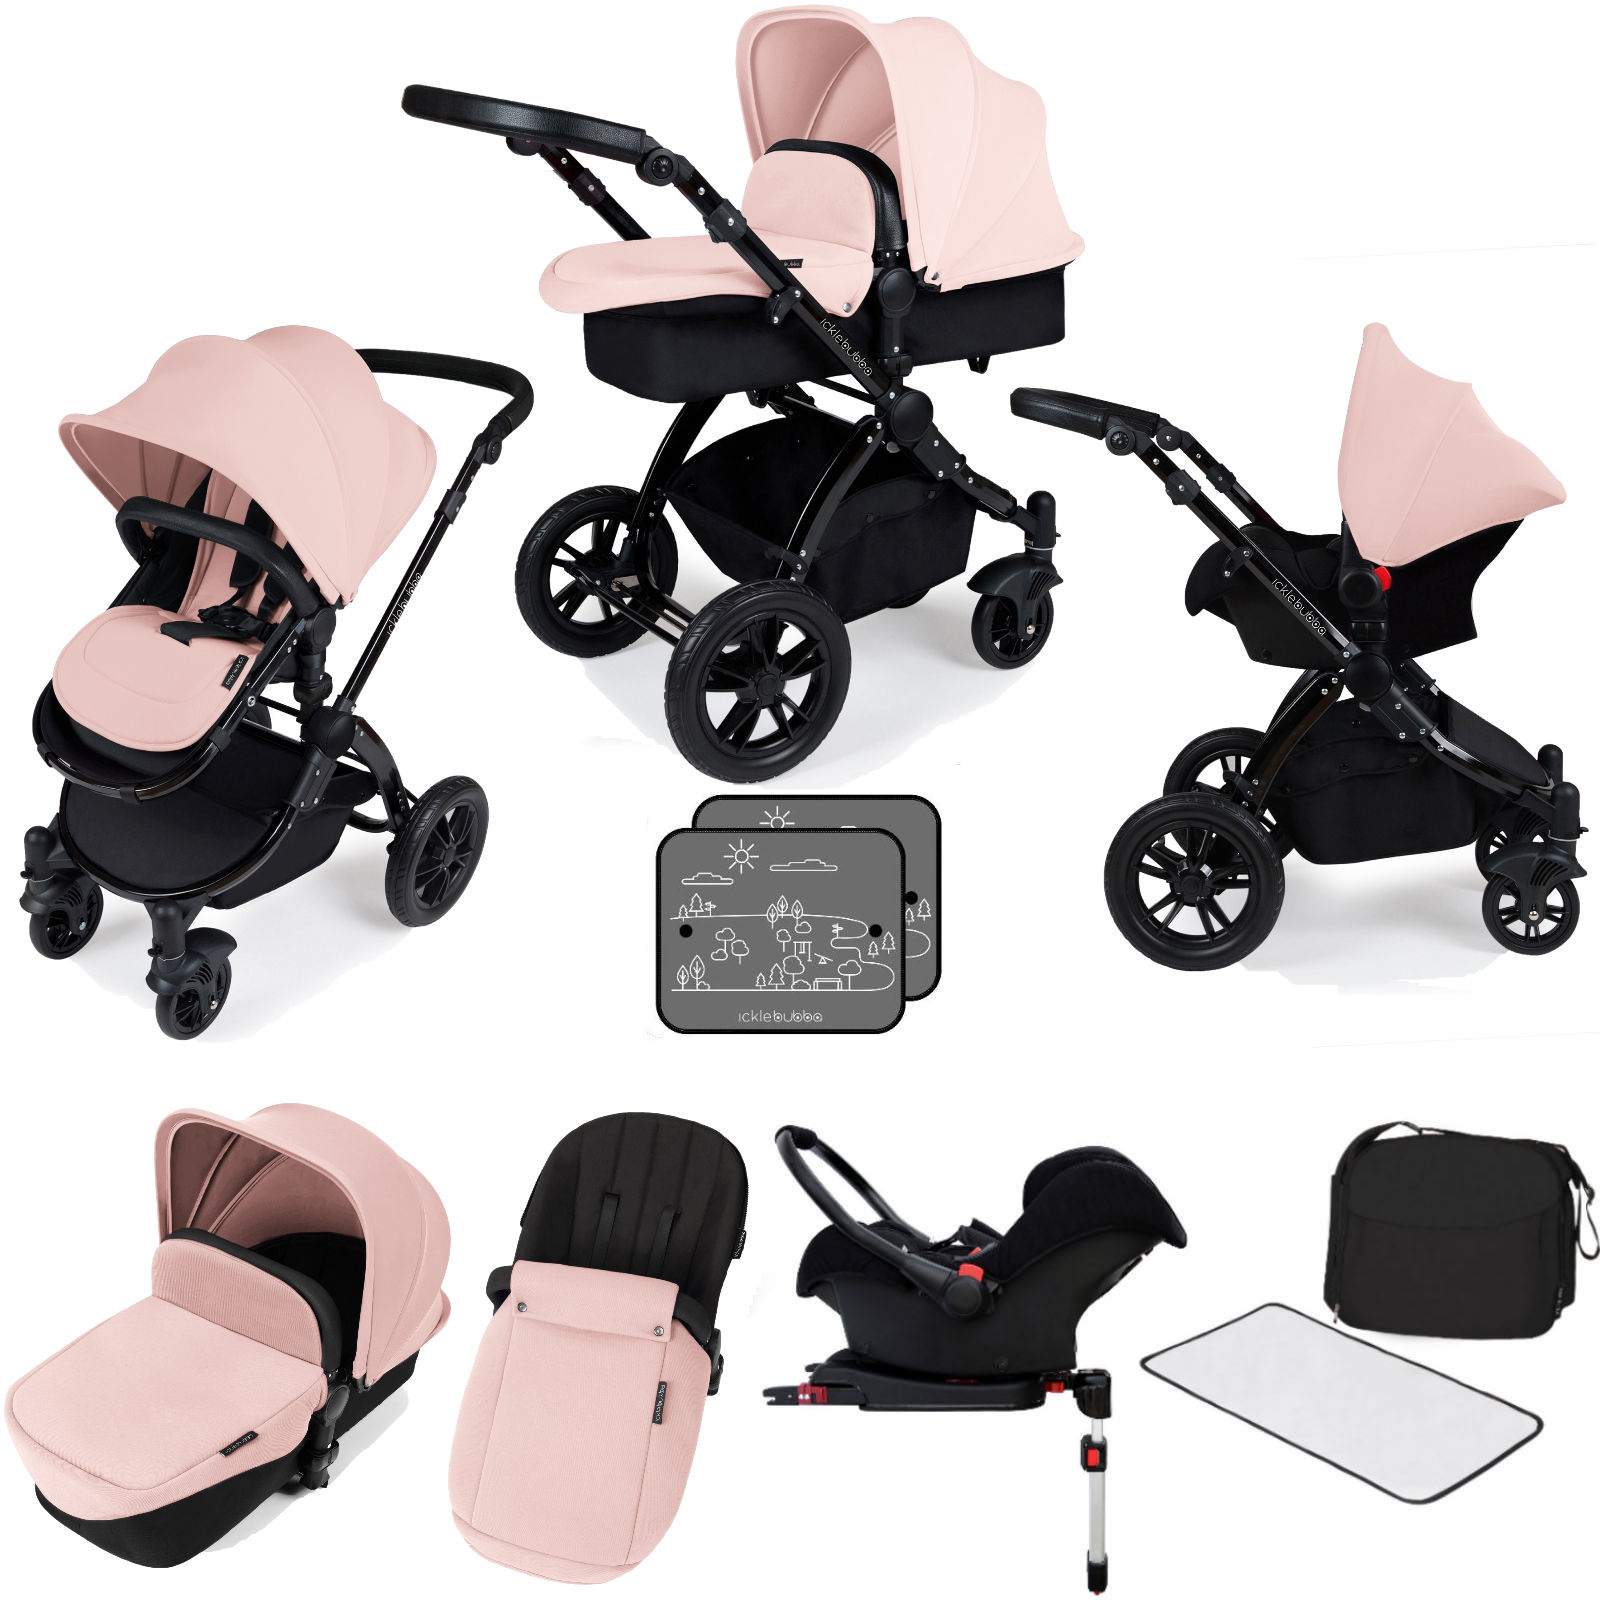 Ickle bubba Stomp V3 Black All In One Travel System & Isofix Base - Pink/Black...